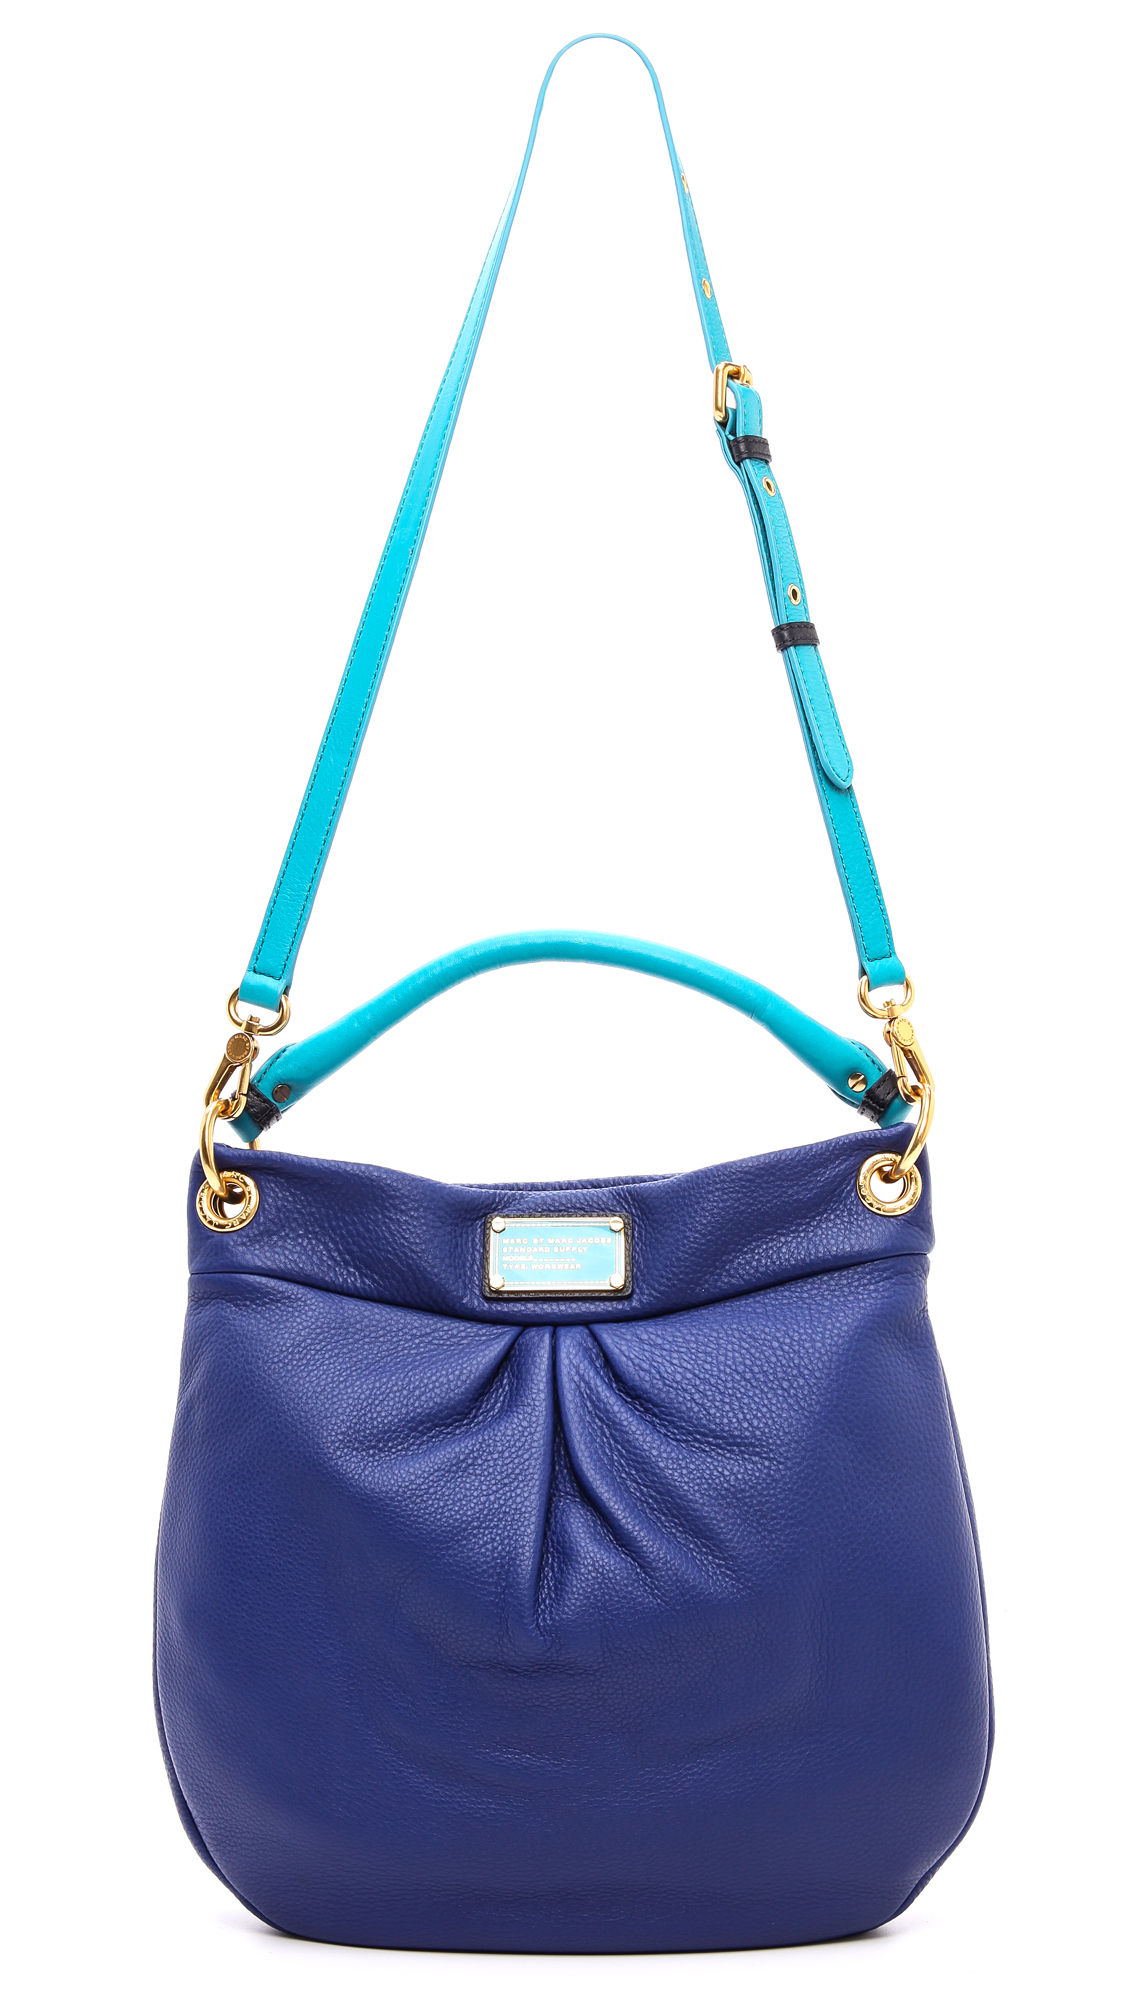 Lyst - Marc by marc jacobs Classic Q Colorblock Hillier Hobo - Bright ...